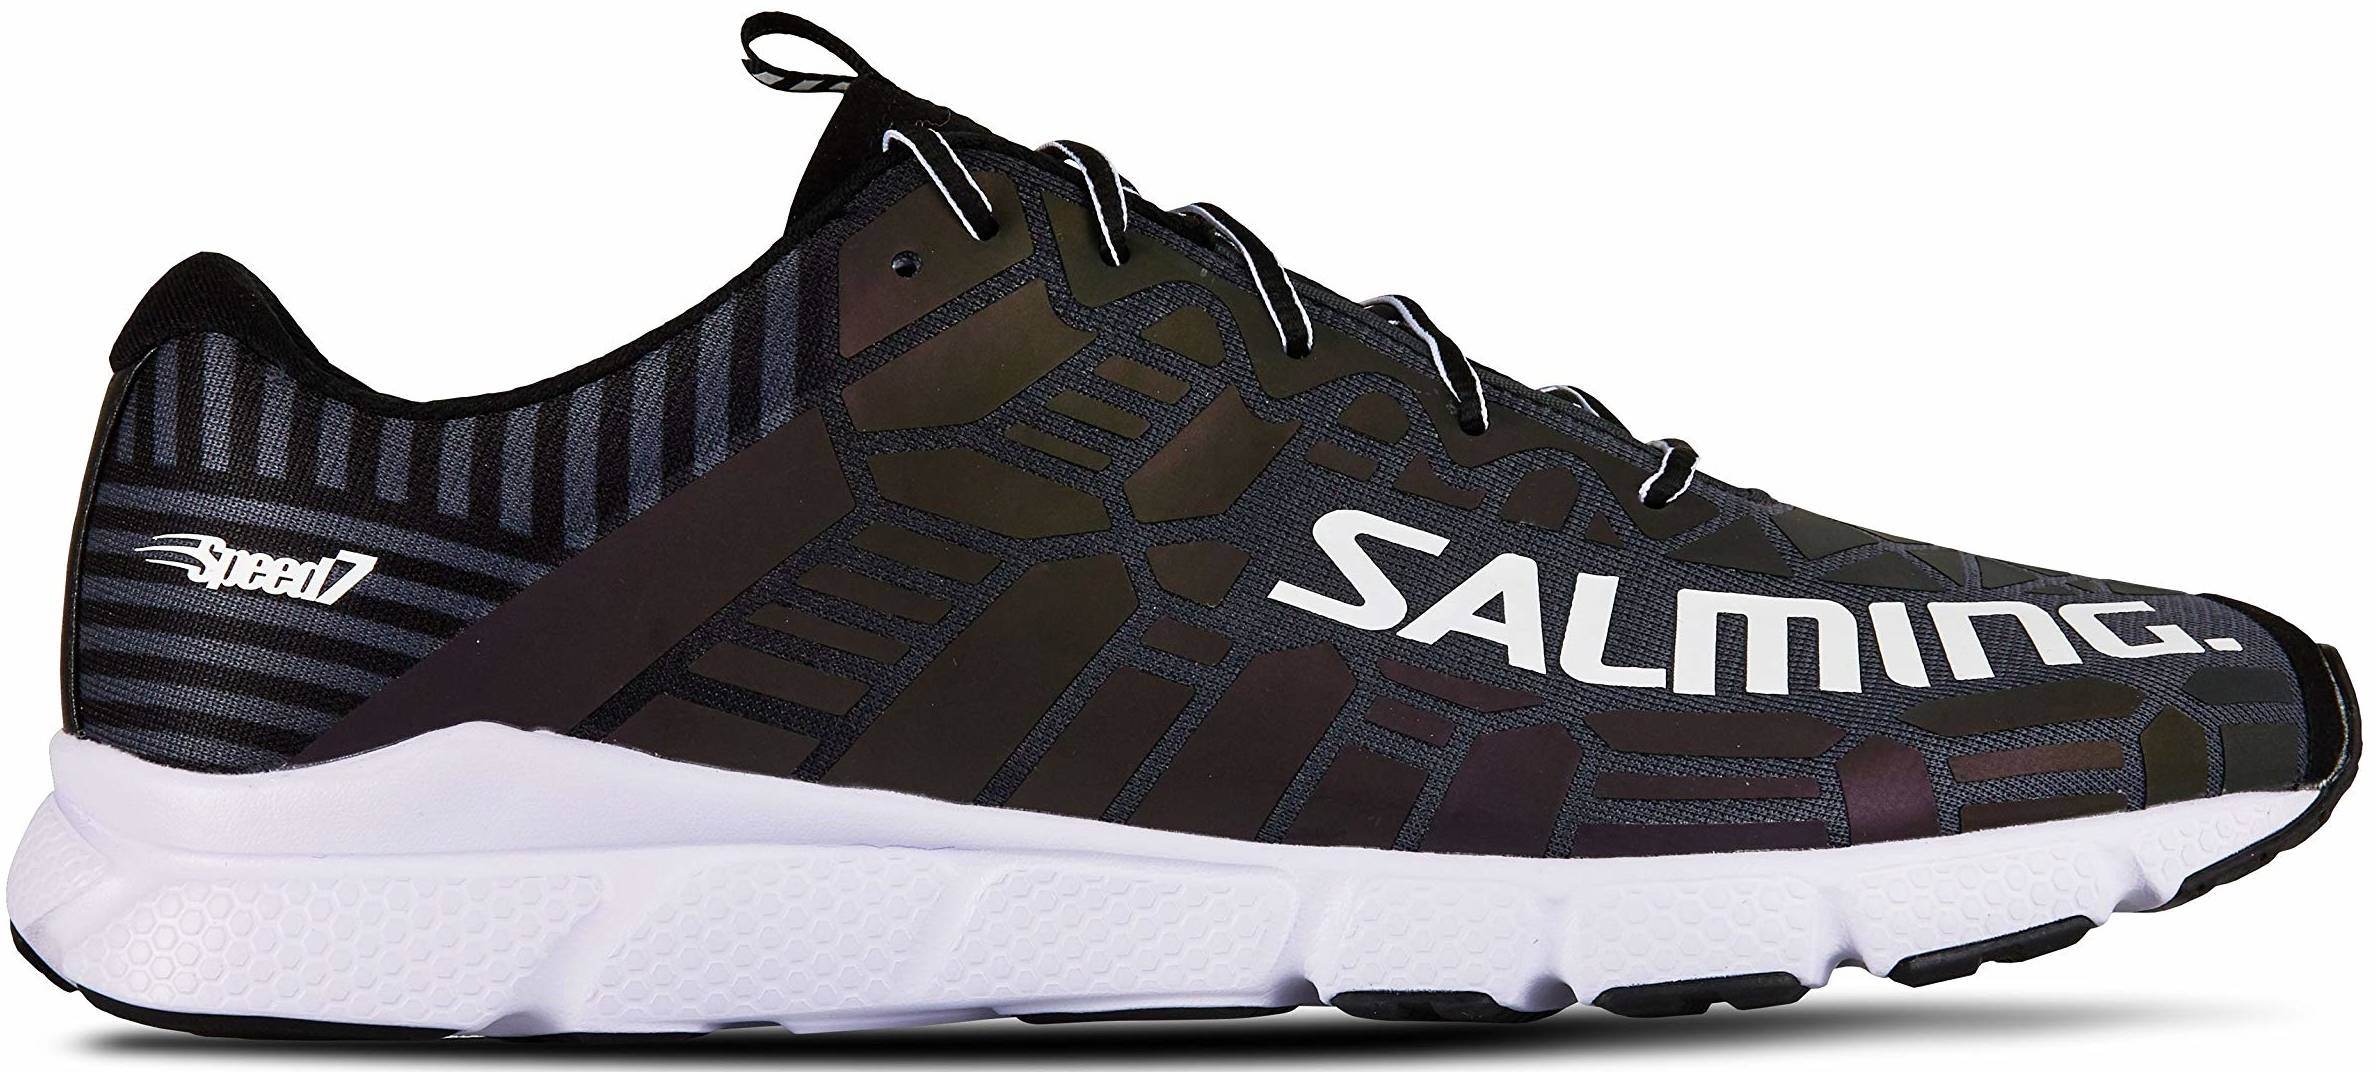 Salming Race 6 1288025-1919 Mens Green Low Top Athletic Gym Running Shoes 